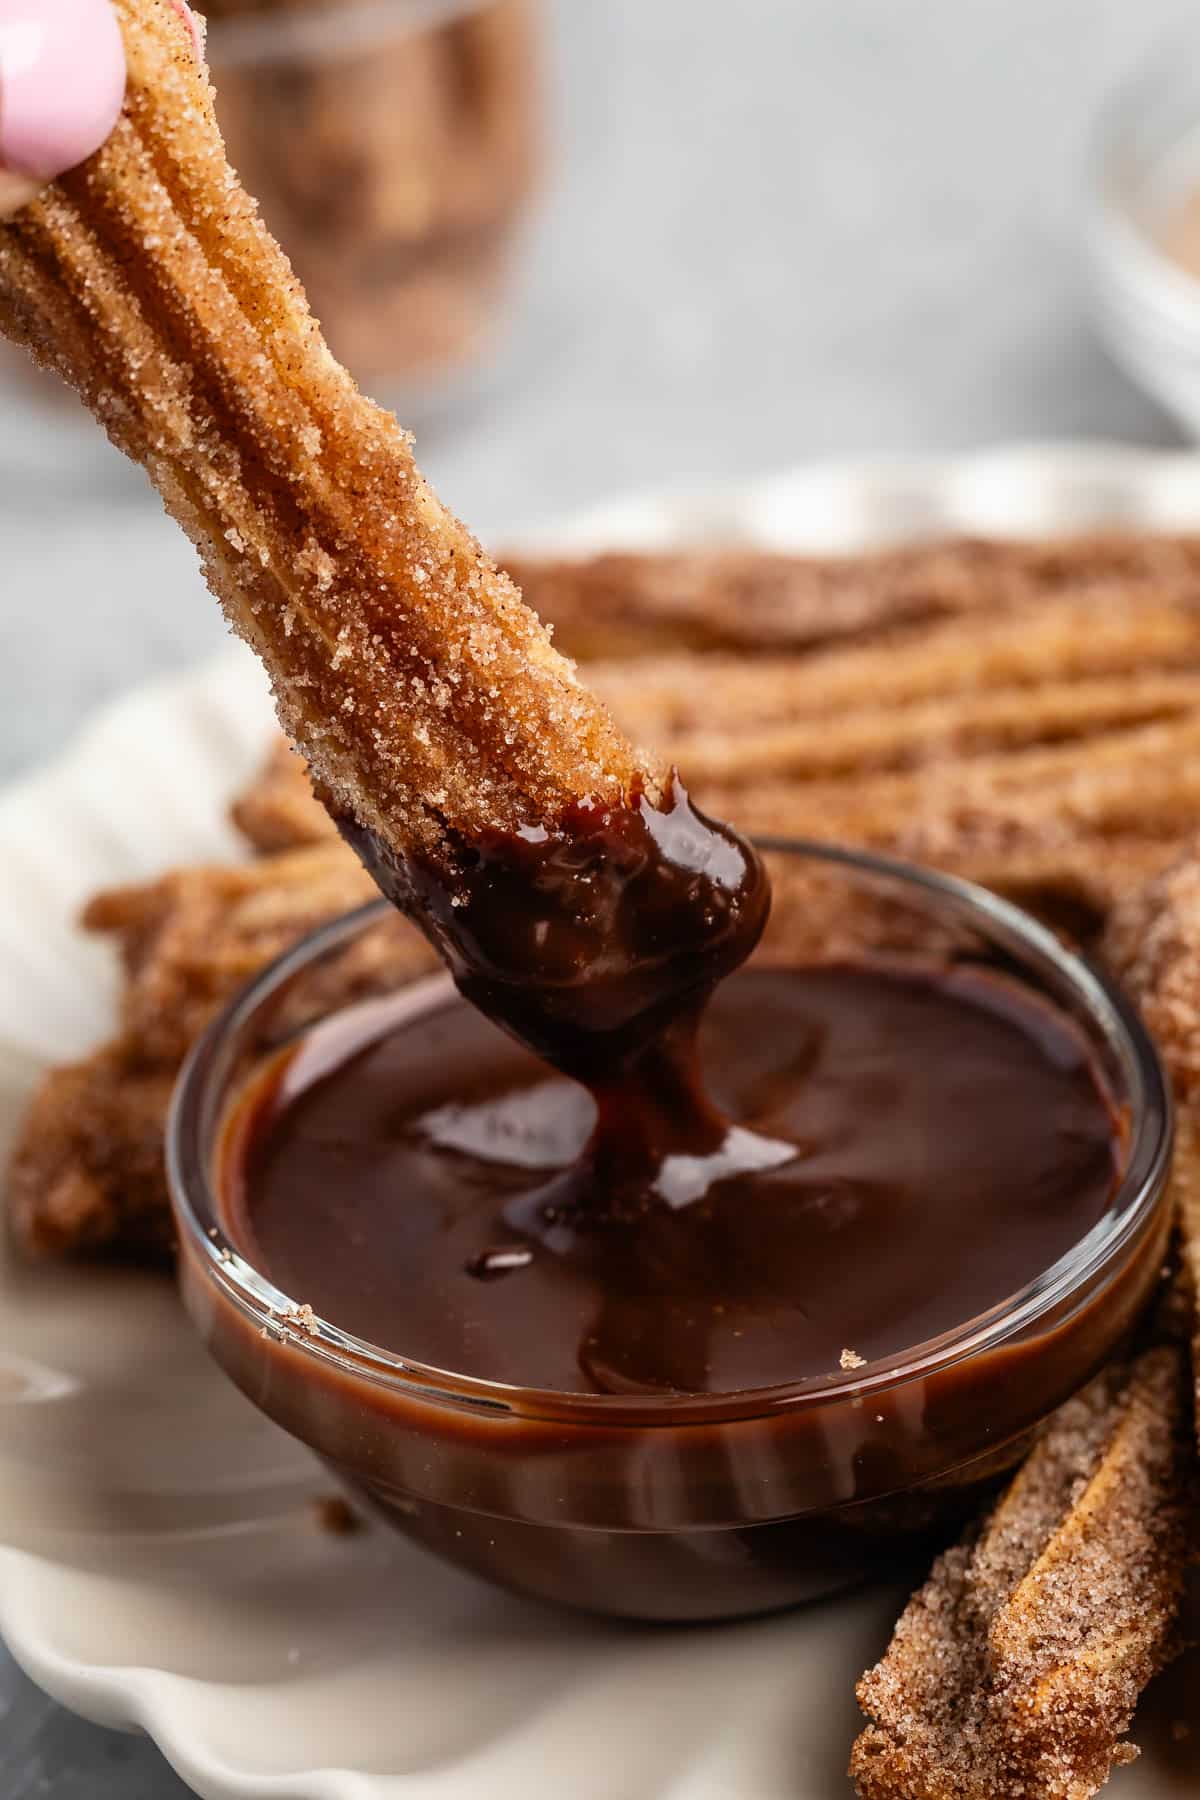 hand dipping a churro in chocolate sauce.